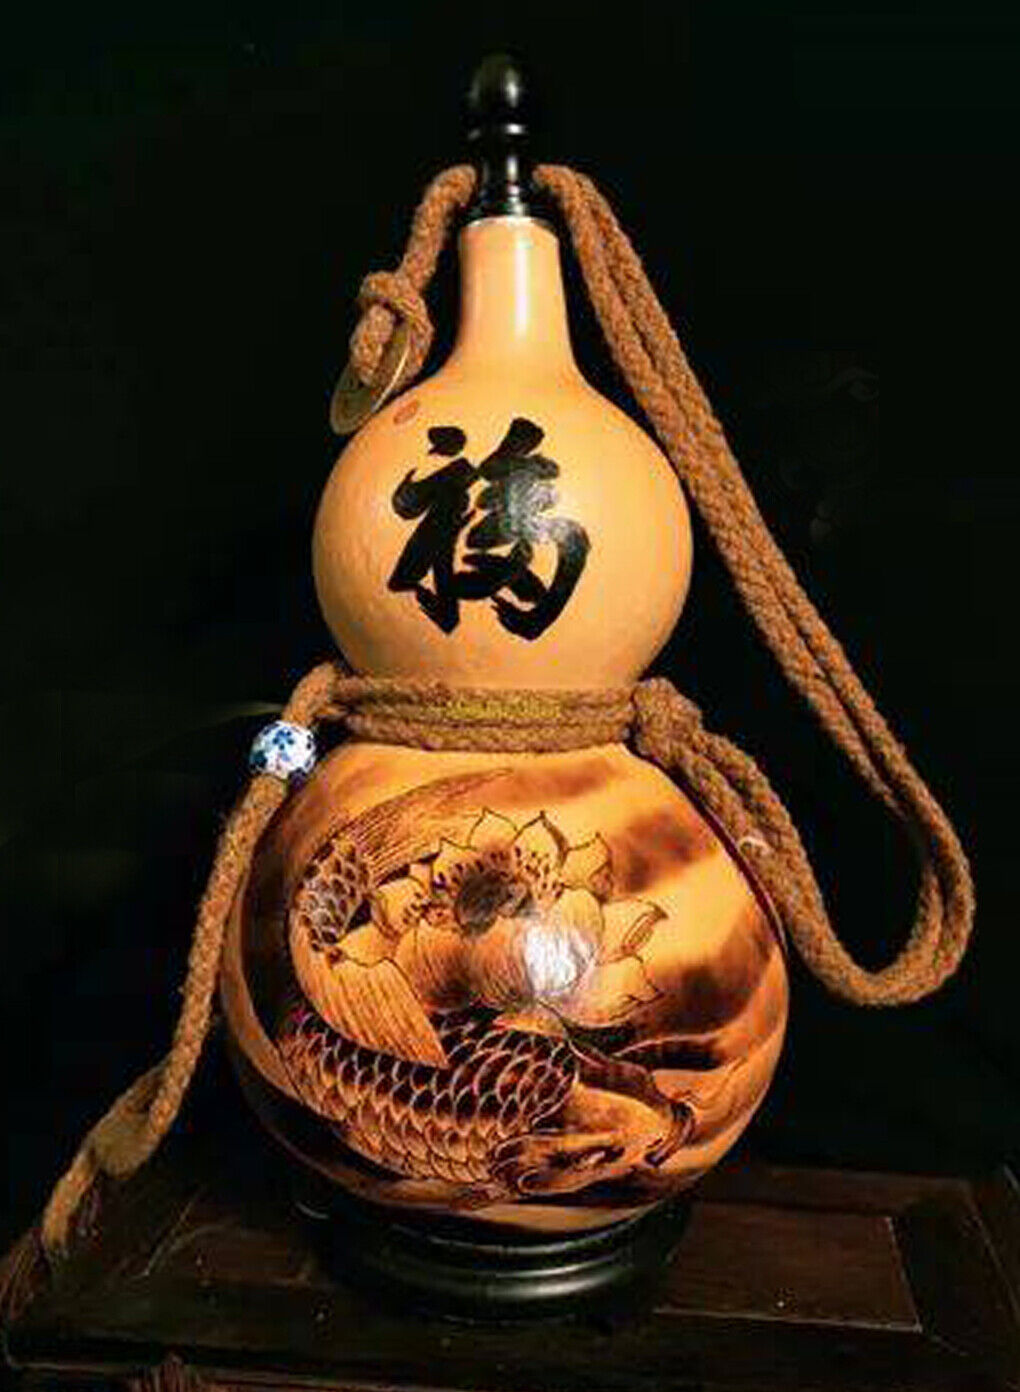 Natural Pyrography Gourd Portable Water Cup Wine Gourd Home Craft Gift #09